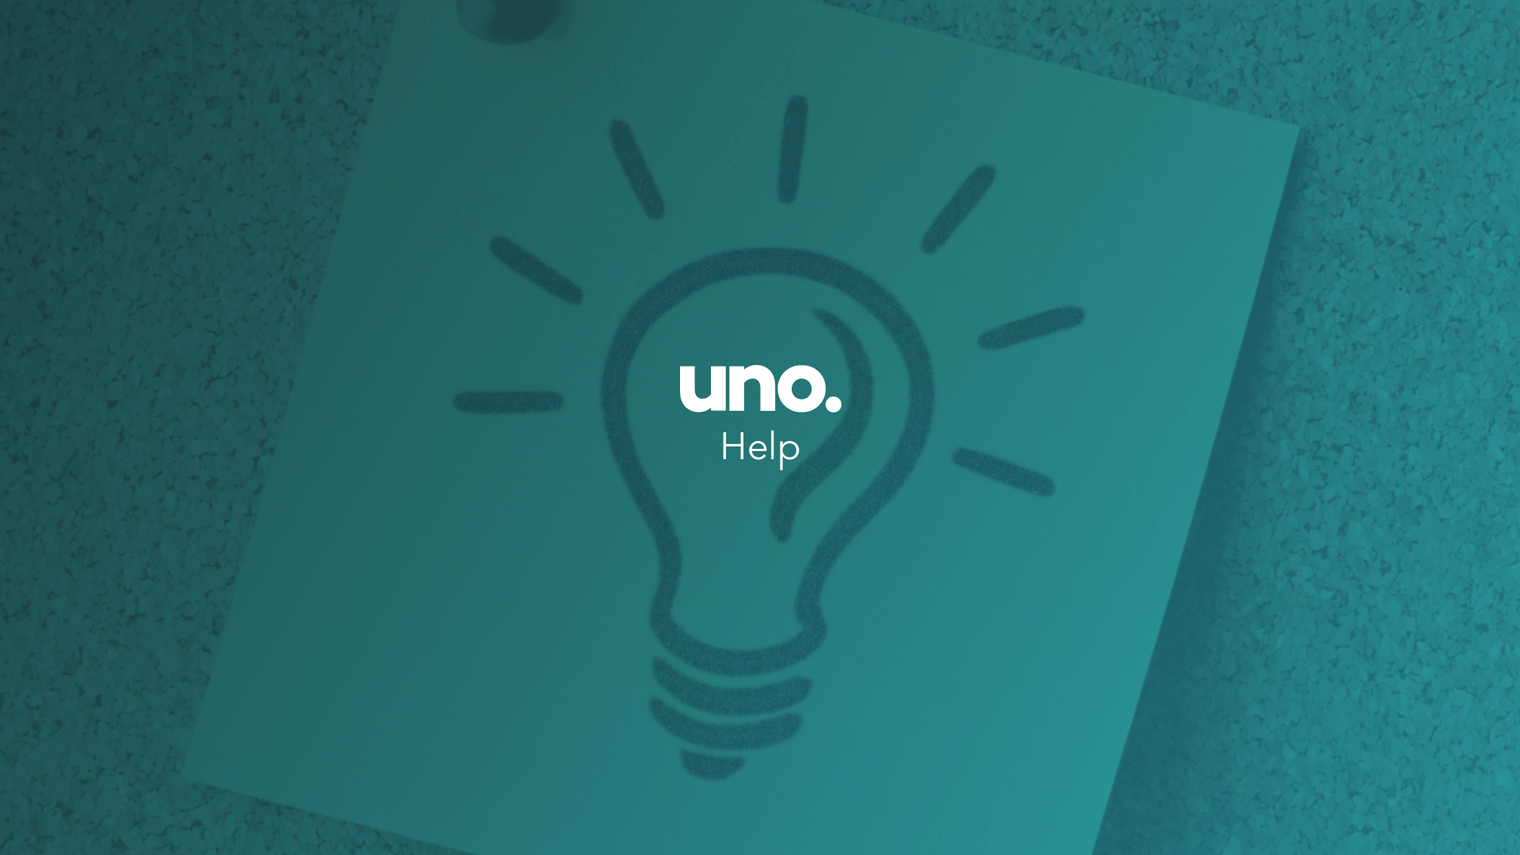 Which devices can I use to access uno?